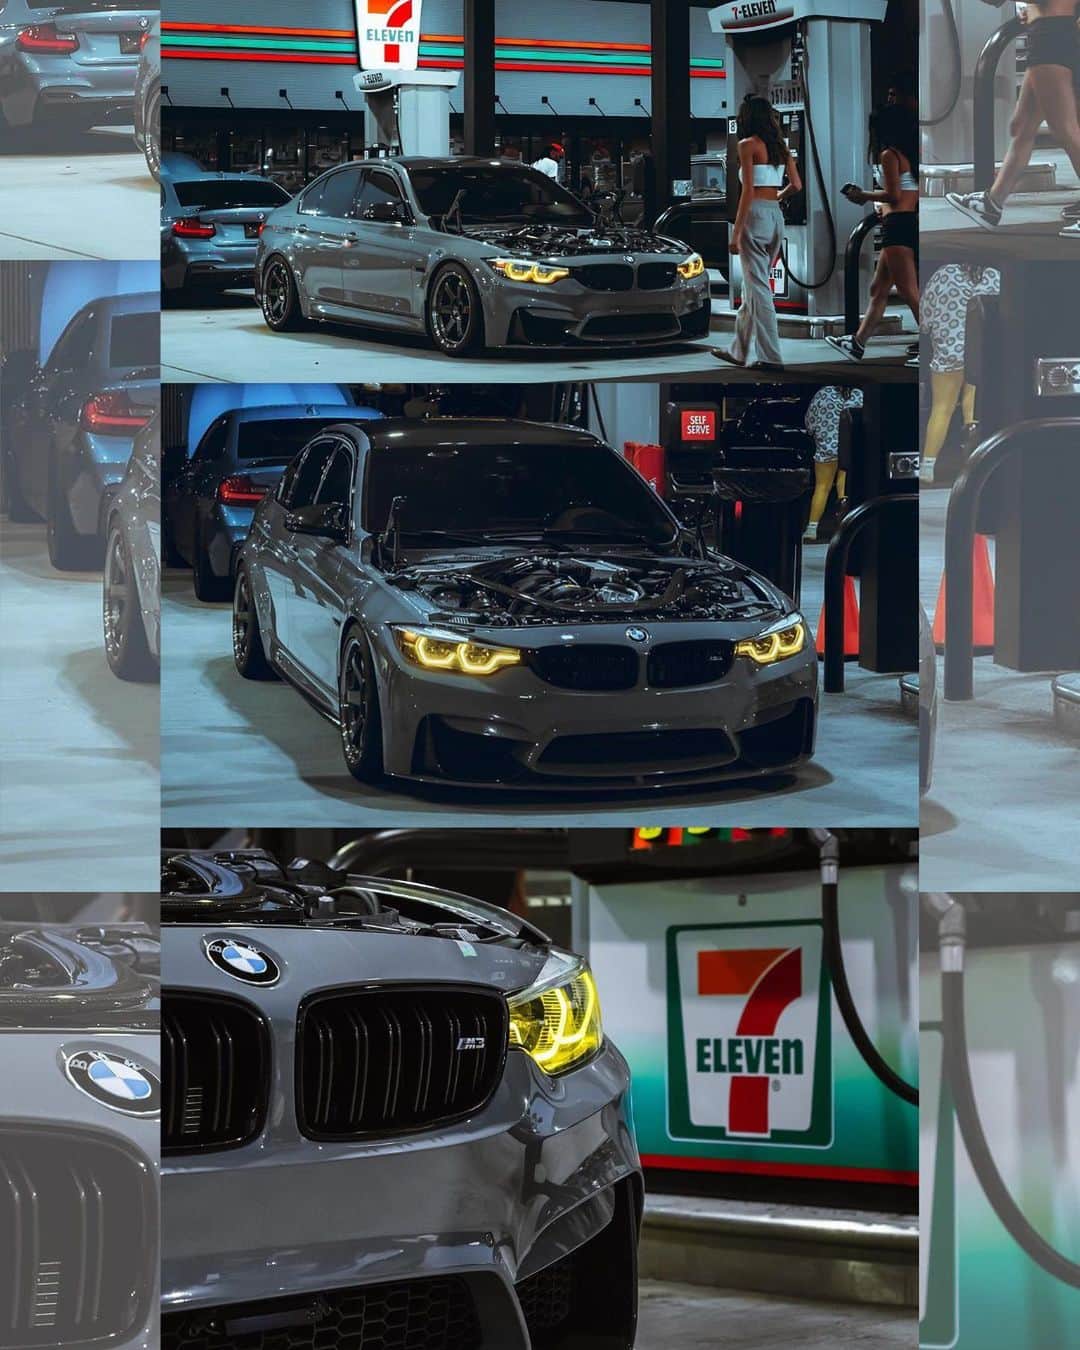 7-Eleven USAのインスタグラム：「Y’all brought the 🔥 this year, so… when’s the next meet?  #SlurpeeDay #711day 😎 #CarsOf7ELEVEn   FRAME 1: @256.rgb FRAME 2: @charliezshots FRAME 3: @jaypekay photographer @eddiemikiphoto FRAME 4: @ayyepaulyy photographer @a9.media FRAME 5: @s13uzara and @project.booboo FRAME 6: @1_sick_c6 and @charliezshots FRAME 7: @crsxtna and @kgals1 and @egindy19 FRAME 8: @a80_sxh and @abbiepaigephotos FRAME 9 : @senseless_co and @drop_dead86 FRAME 10: @elstango and photographer @nowhip.photography」